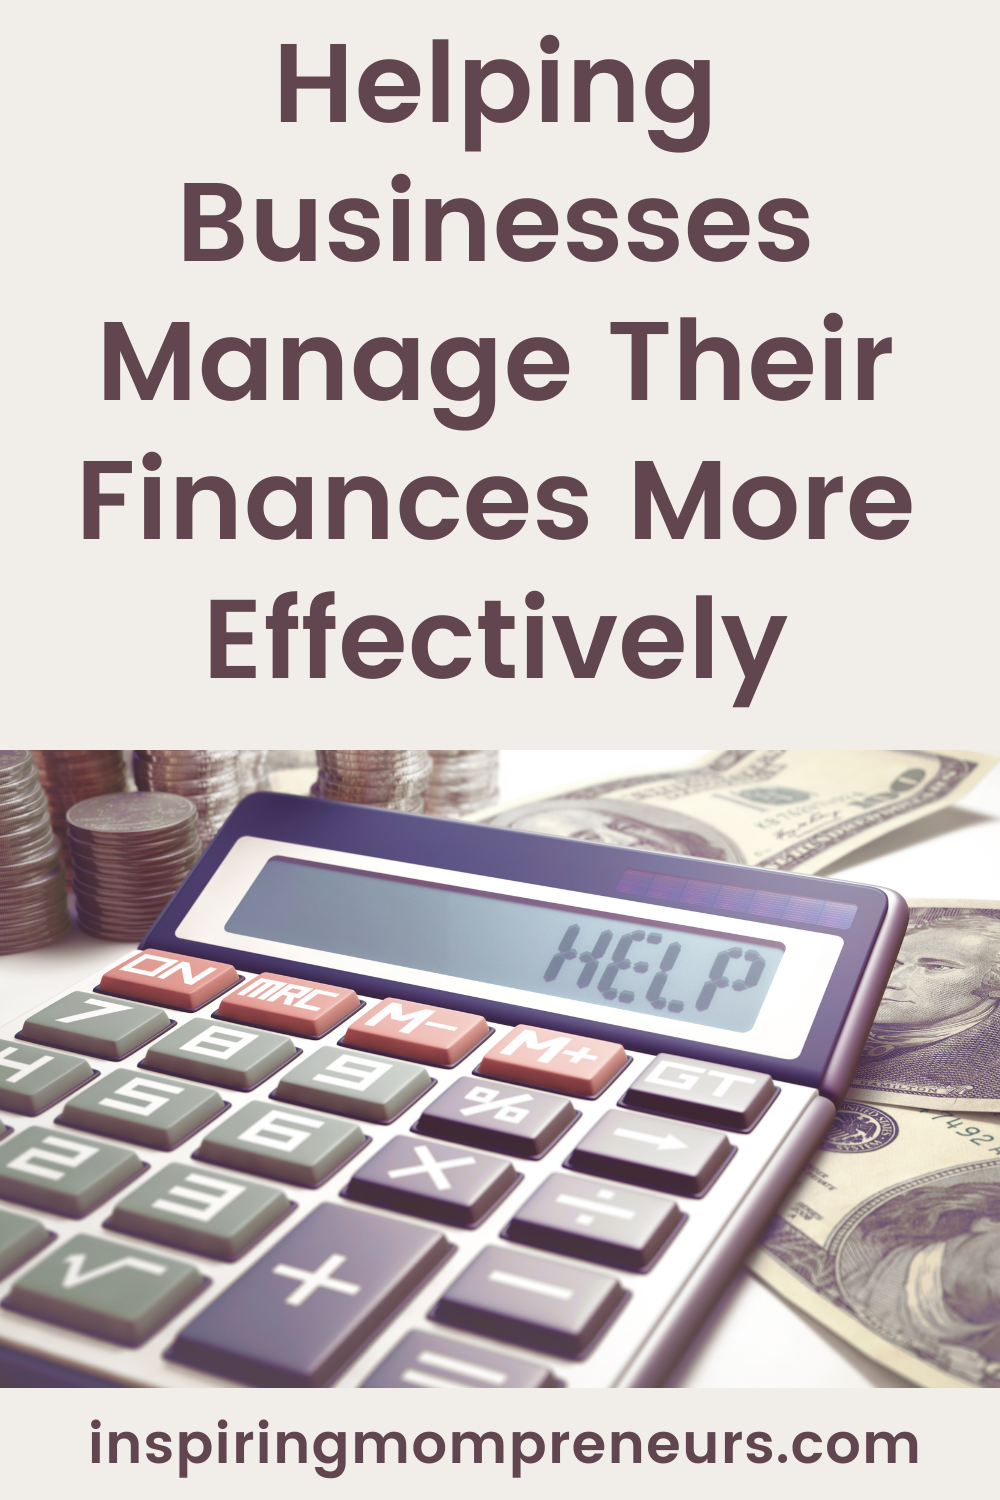 Find out what Fair Figure is, how easy it is to use and how this free online service is helping businesses manage their finances more effectively. 